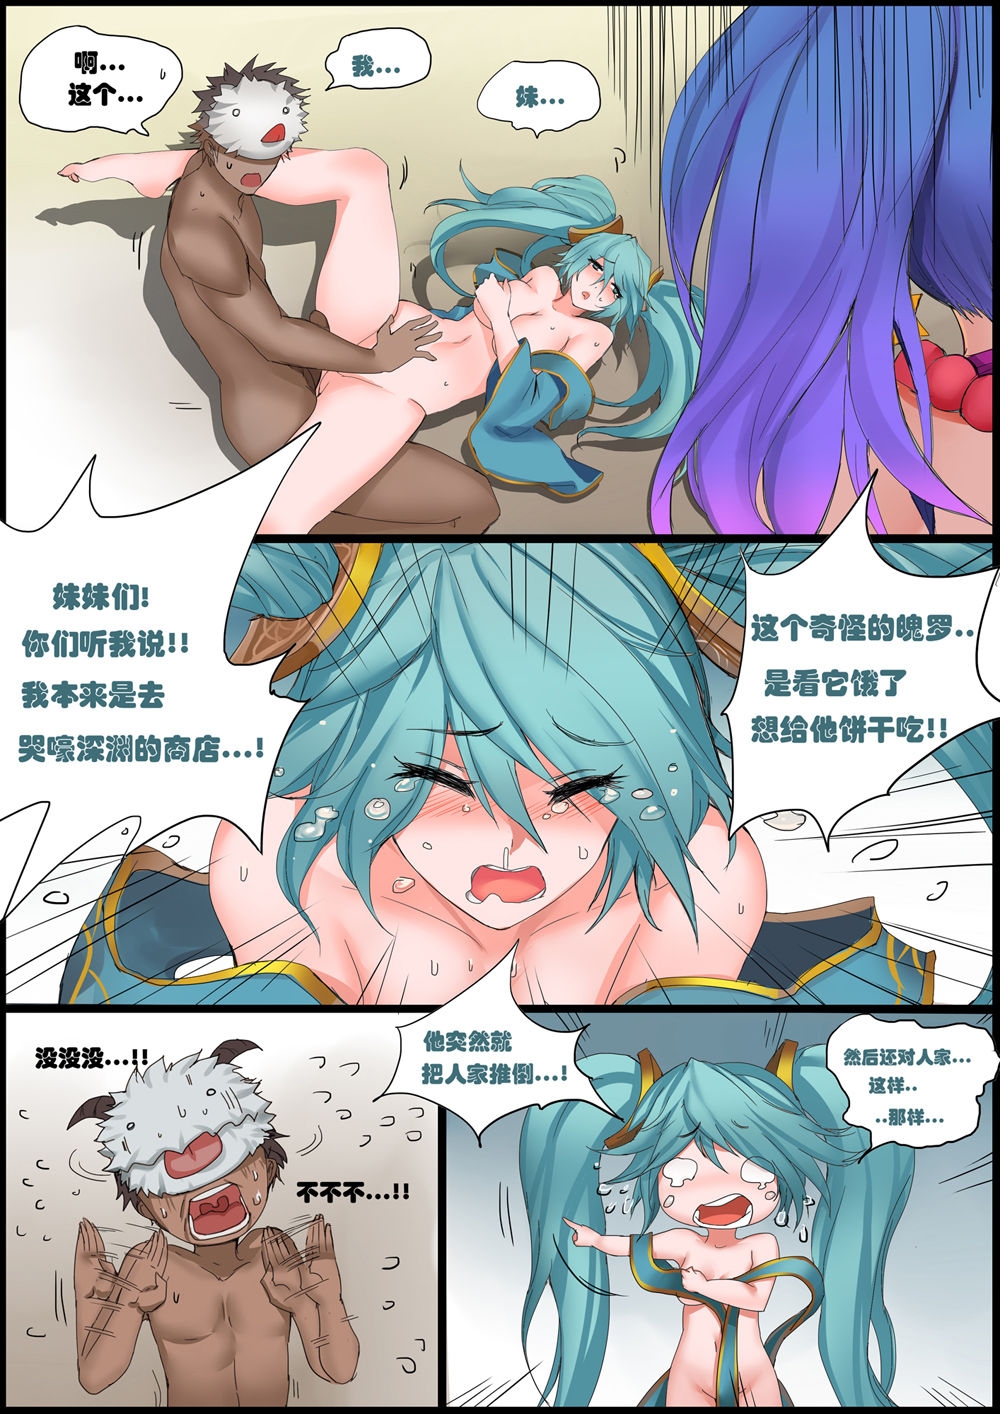 [Pd] Sona's Home Second Part (League of Legends) [Chinese] 2